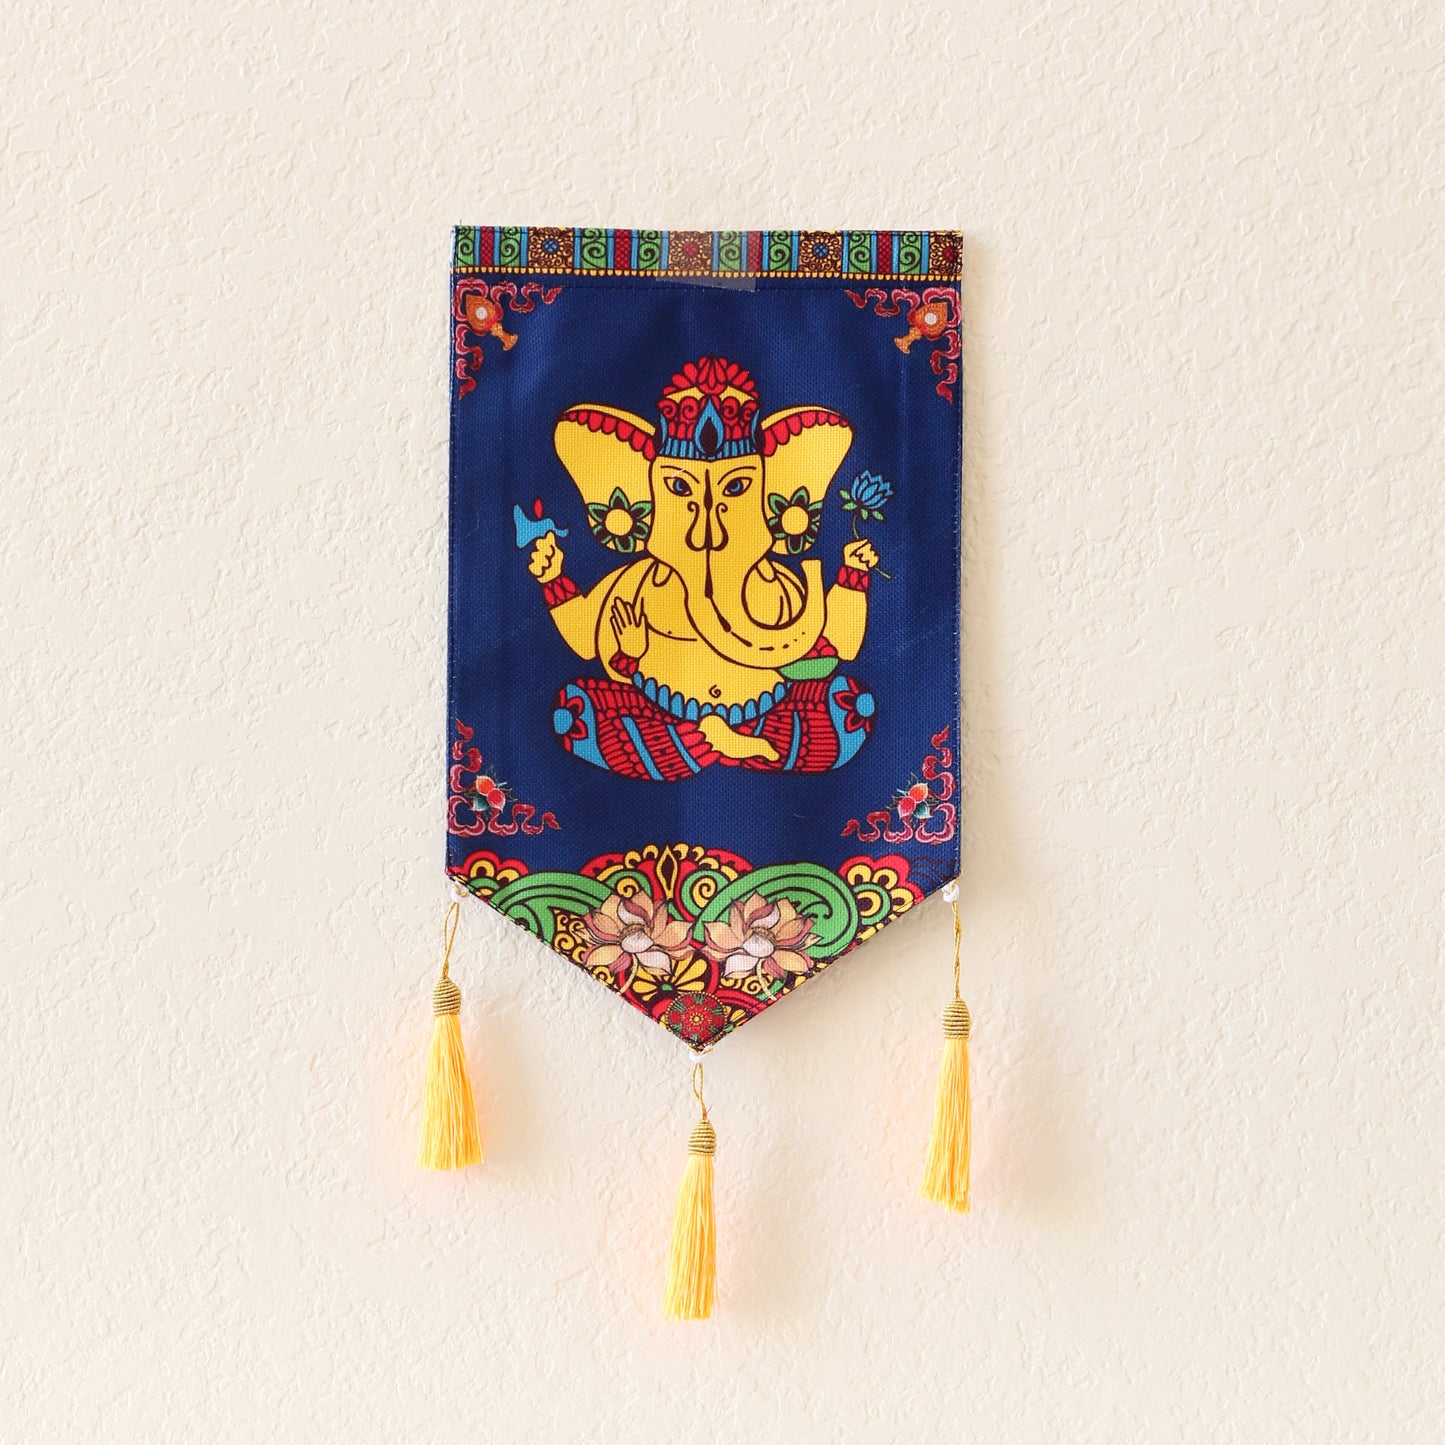 Thai Style Buddhist Om Symbol Small Canvas Tapestry Wall Hanging Tassels, 9.5"X16", Asian Chinese Art